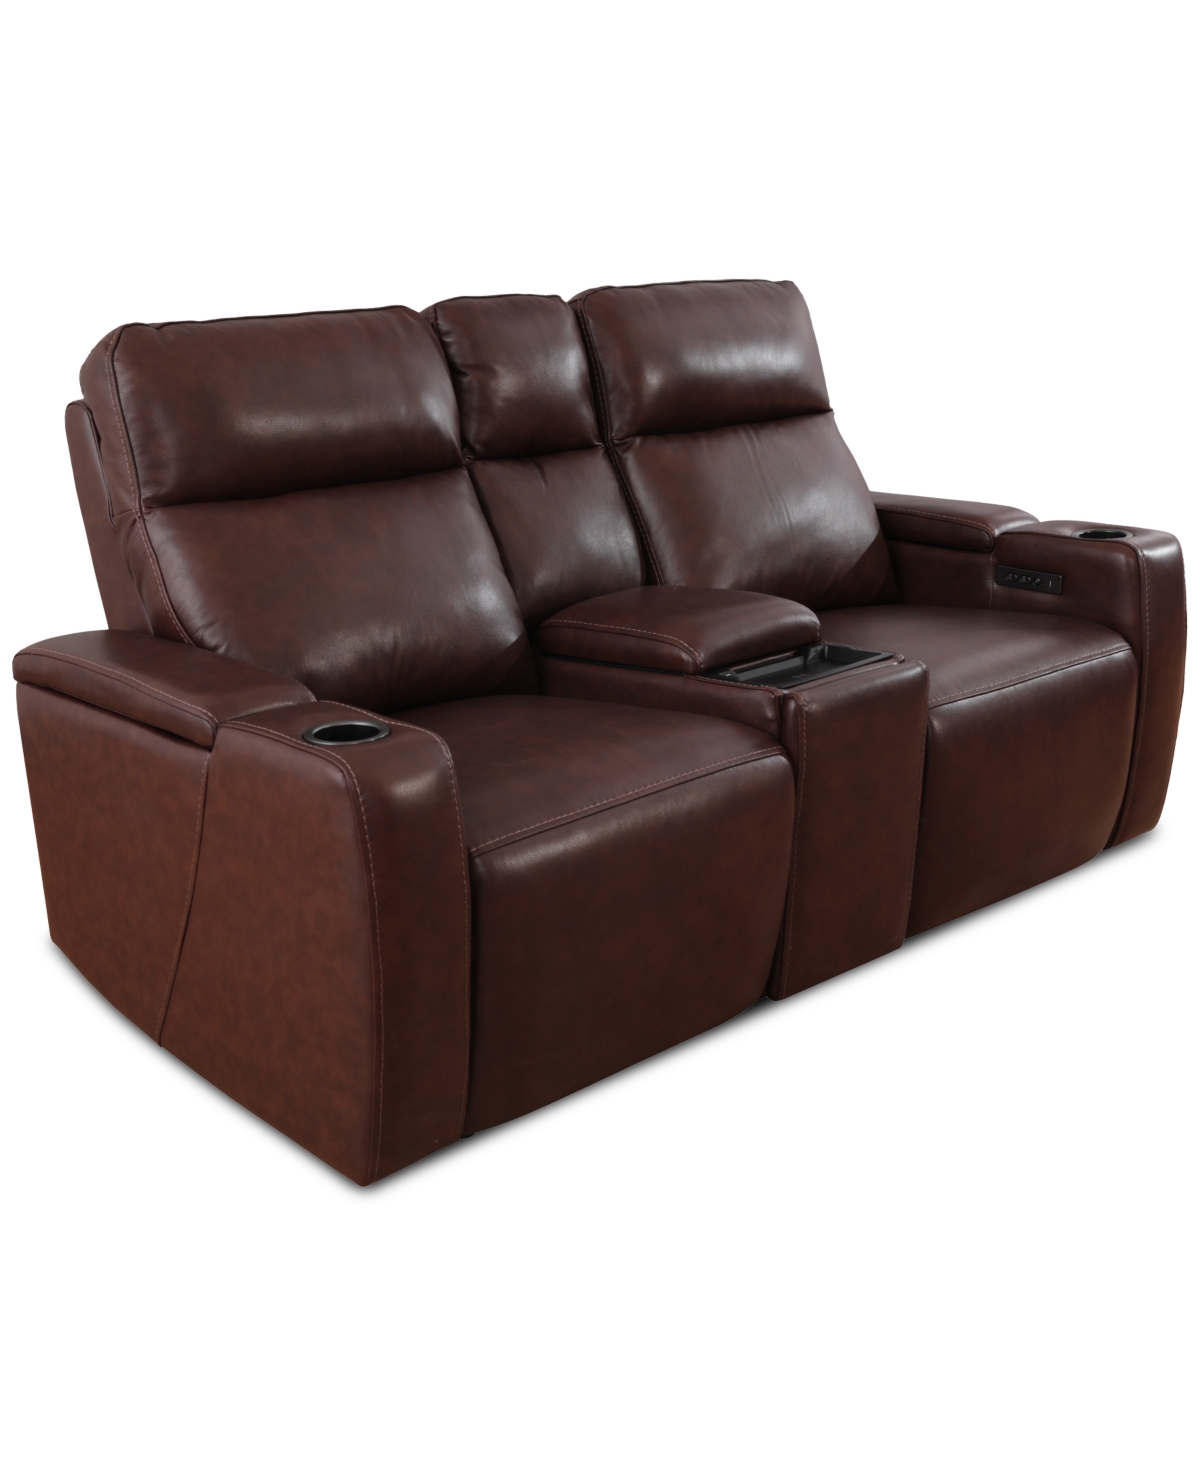 Macy's Greymel 74" Zero Gravity Leather Loveseat With Console And Power Headrests, Created For  In Walnut